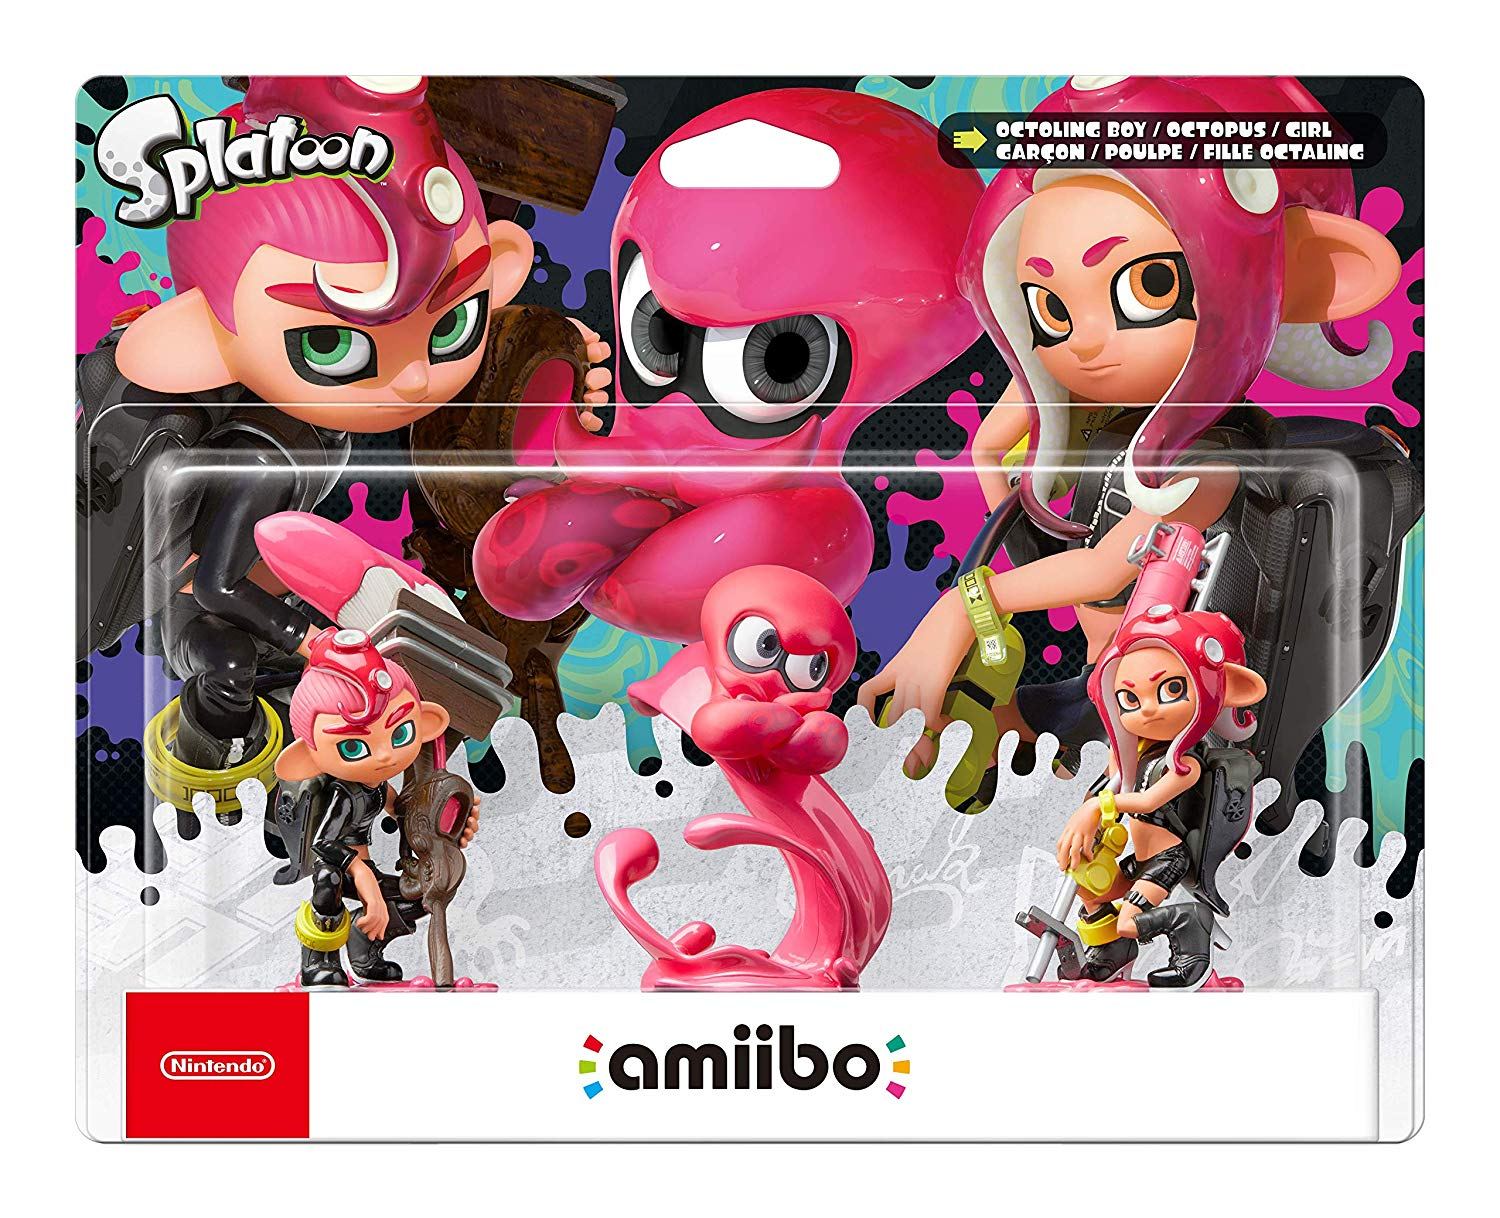 Splatoon 2 Series Figure Triple Pack (Octoling Boy Octoling / Octoling Girl) for Wii U, New New 3DS LL / XL, SW